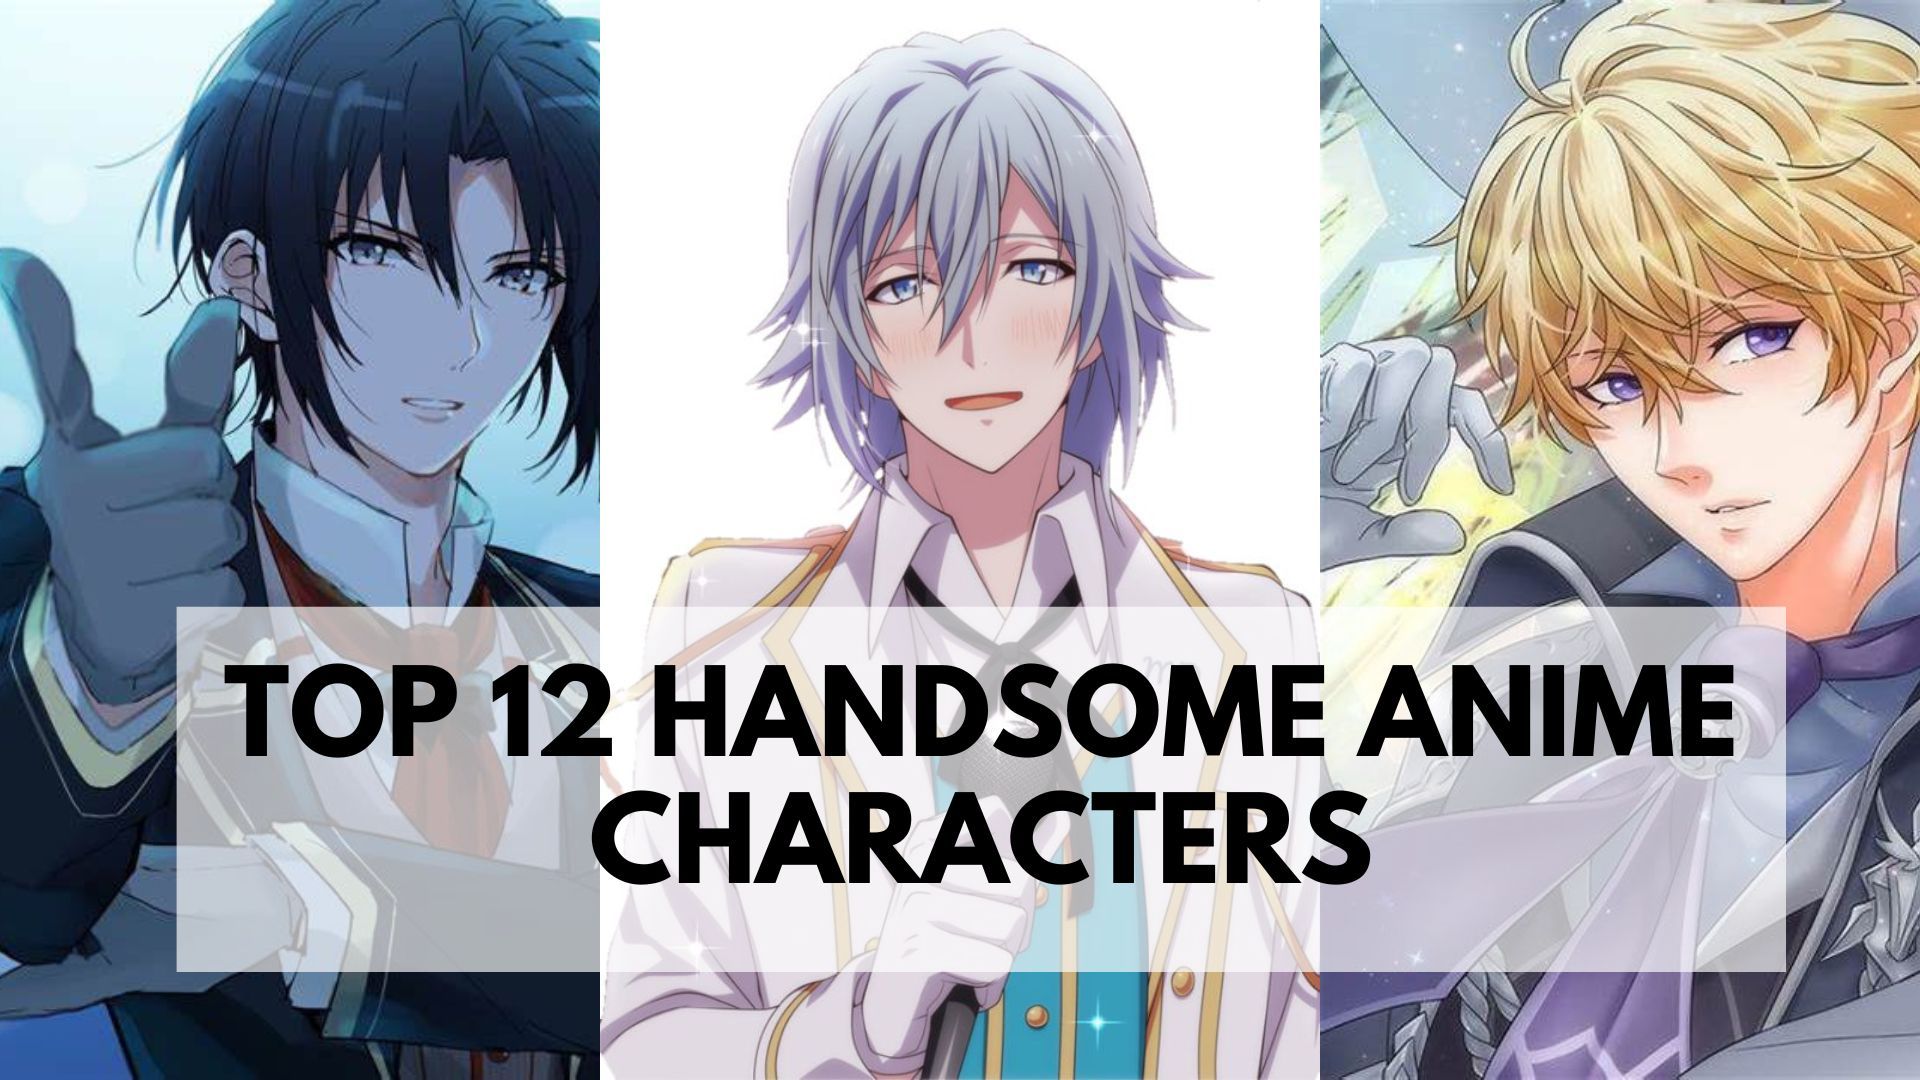 TOP 12 HANDSOME ANIME CHARACTERS  Bilibili